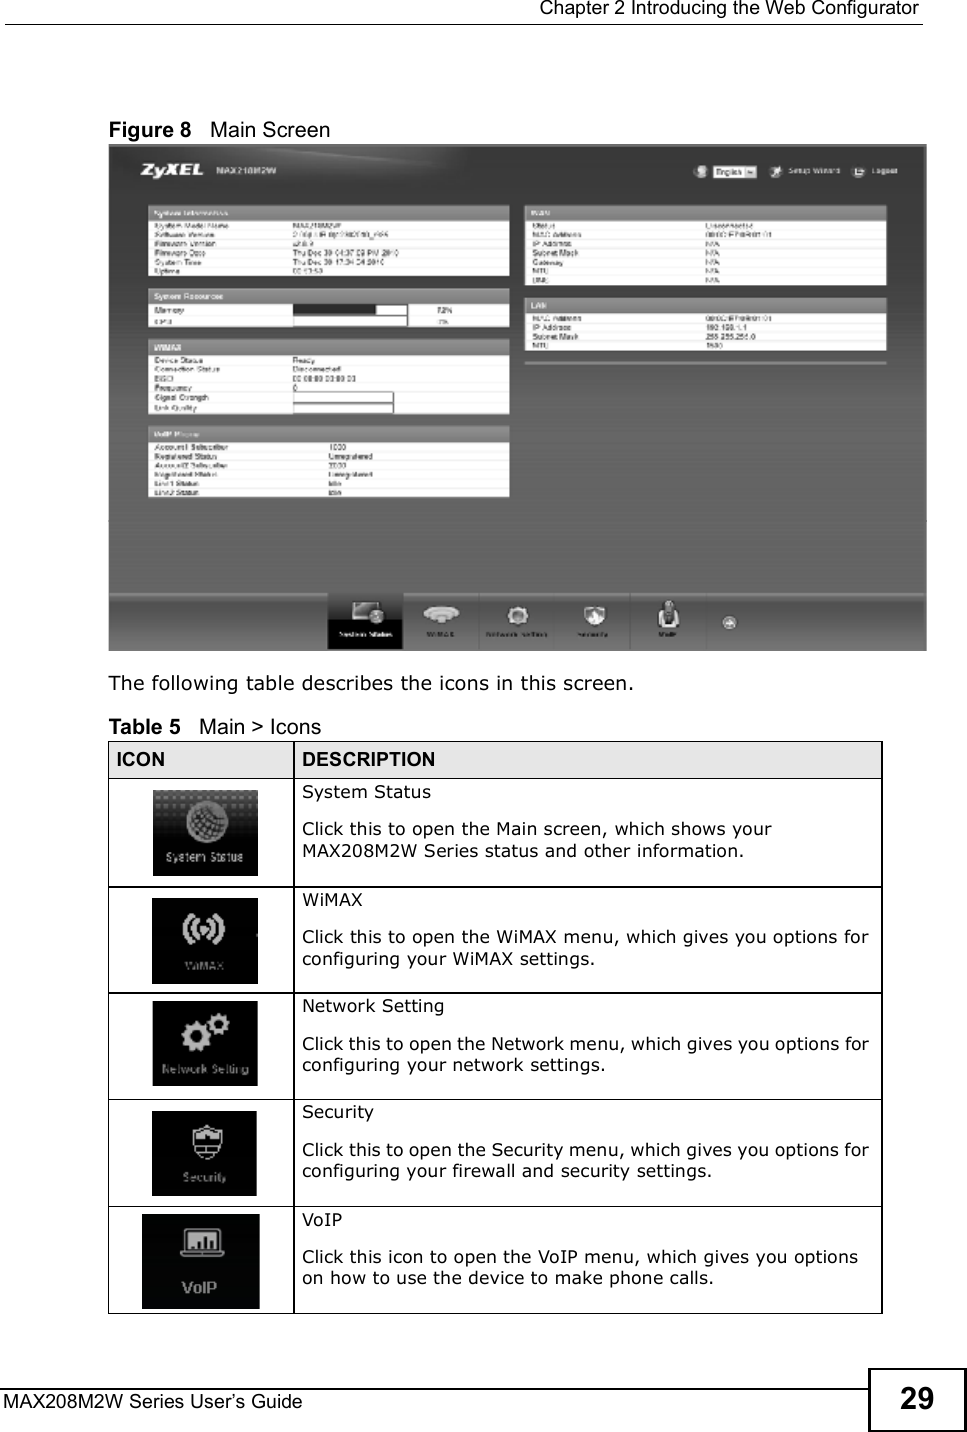  Chapter 2Introducing the Web ConfiguratorMAX208M2W Series User s Guide 29Figure 8   Main ScreenThe following table describes the icons in this screen.Table 5   Main &gt; IconsICON DESCRIPTIONSystem StatusClick this to open the Main screen, which shows your MAX208M2W Series status and other information.WiMAXClick this to open the WiMAX menu, which gives you options for configuring your WiMAX settings.Network SettingClick this to open the Network menu, which gives you options for configuring your network settings.SecurityClick this to open the Security menu, which gives you options for configuring your firewall and security settings.VoIPClick this icon to open the VoIP menu, which gives you options  on how to use the device to make phone calls.